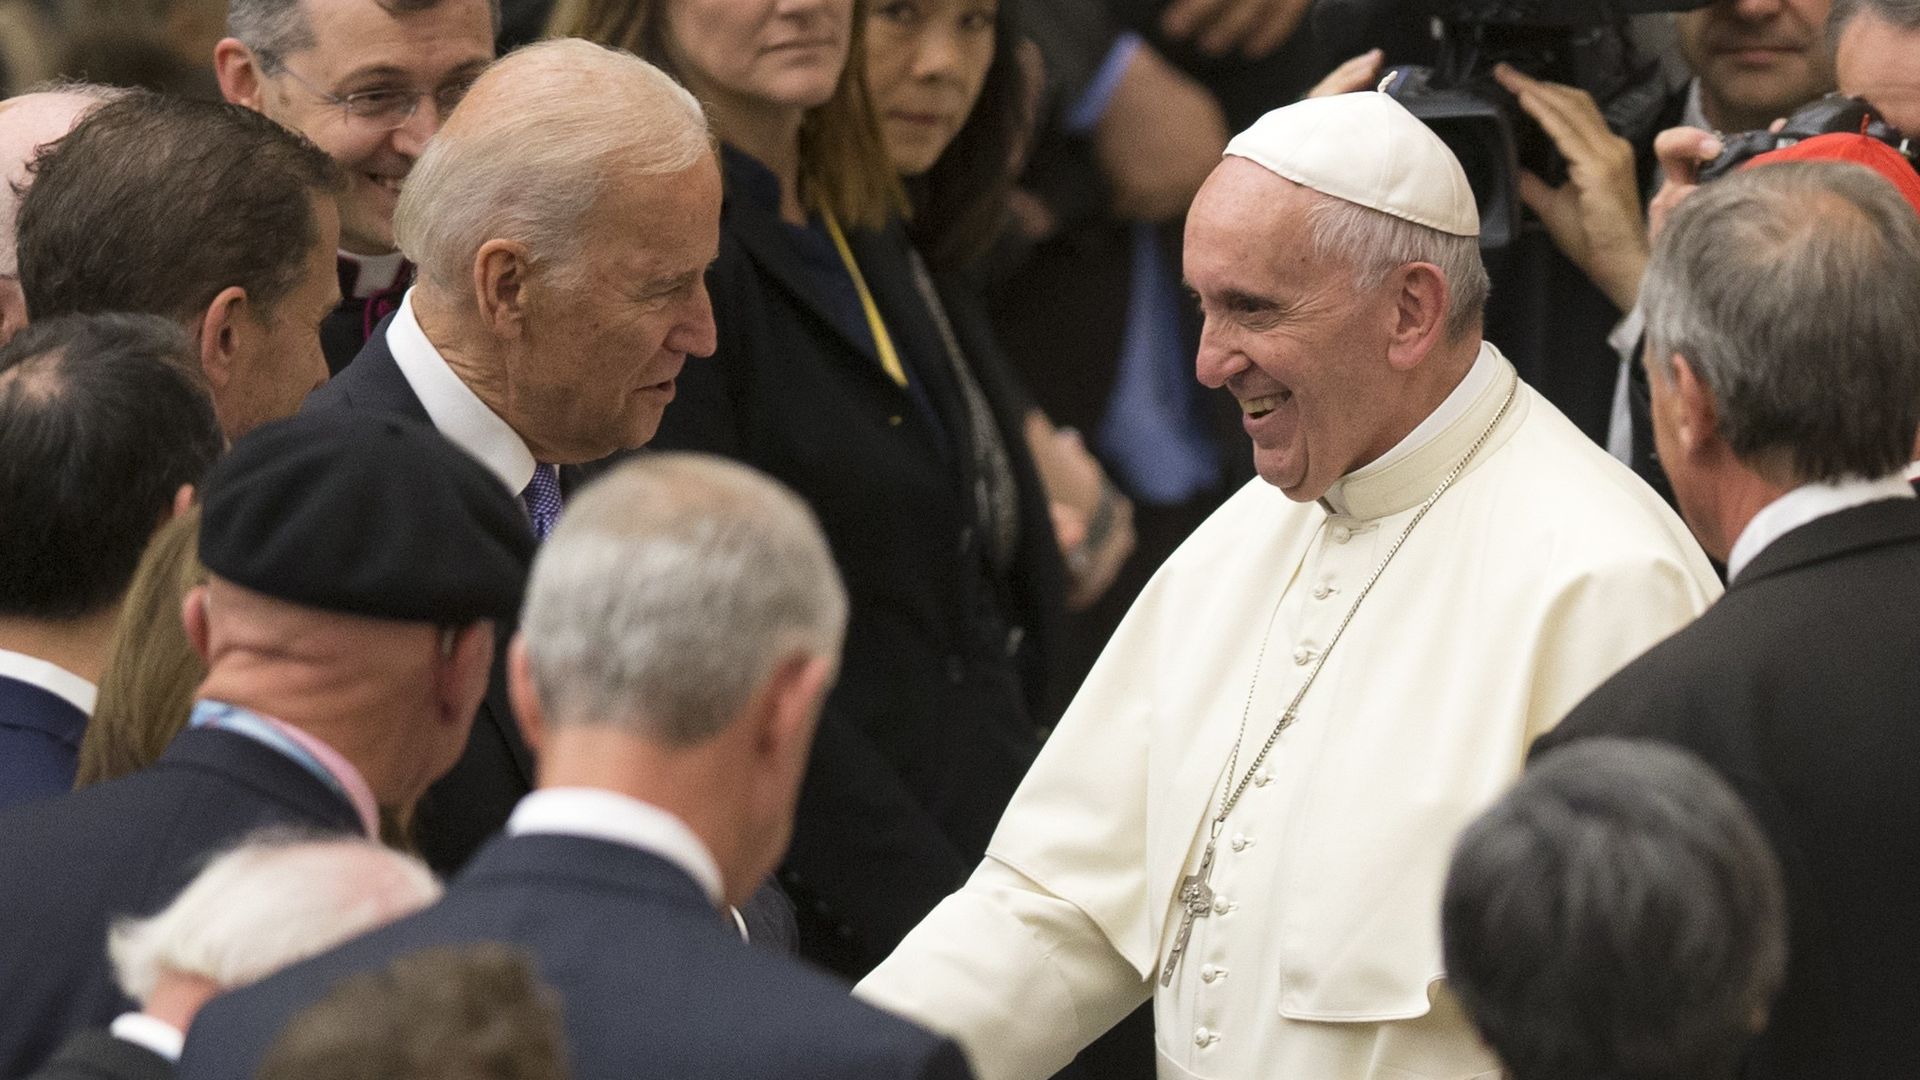 Pope Francis greeting then Vice President Joe Biden at the Vatican in April 2016.